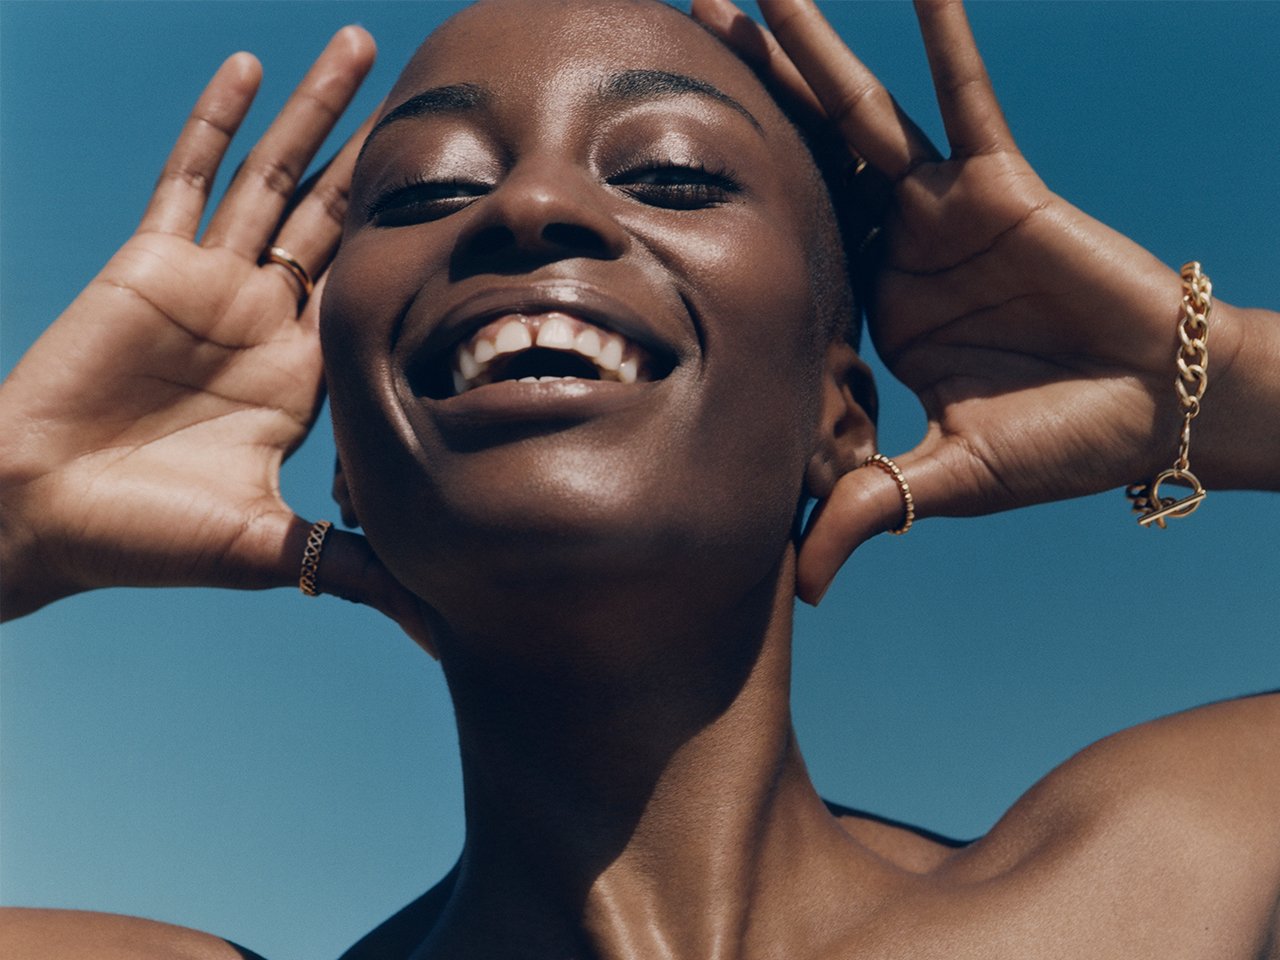 A model with glowing skin photographed smiling in the sun to illustrate an article about vitamin C in skincare.